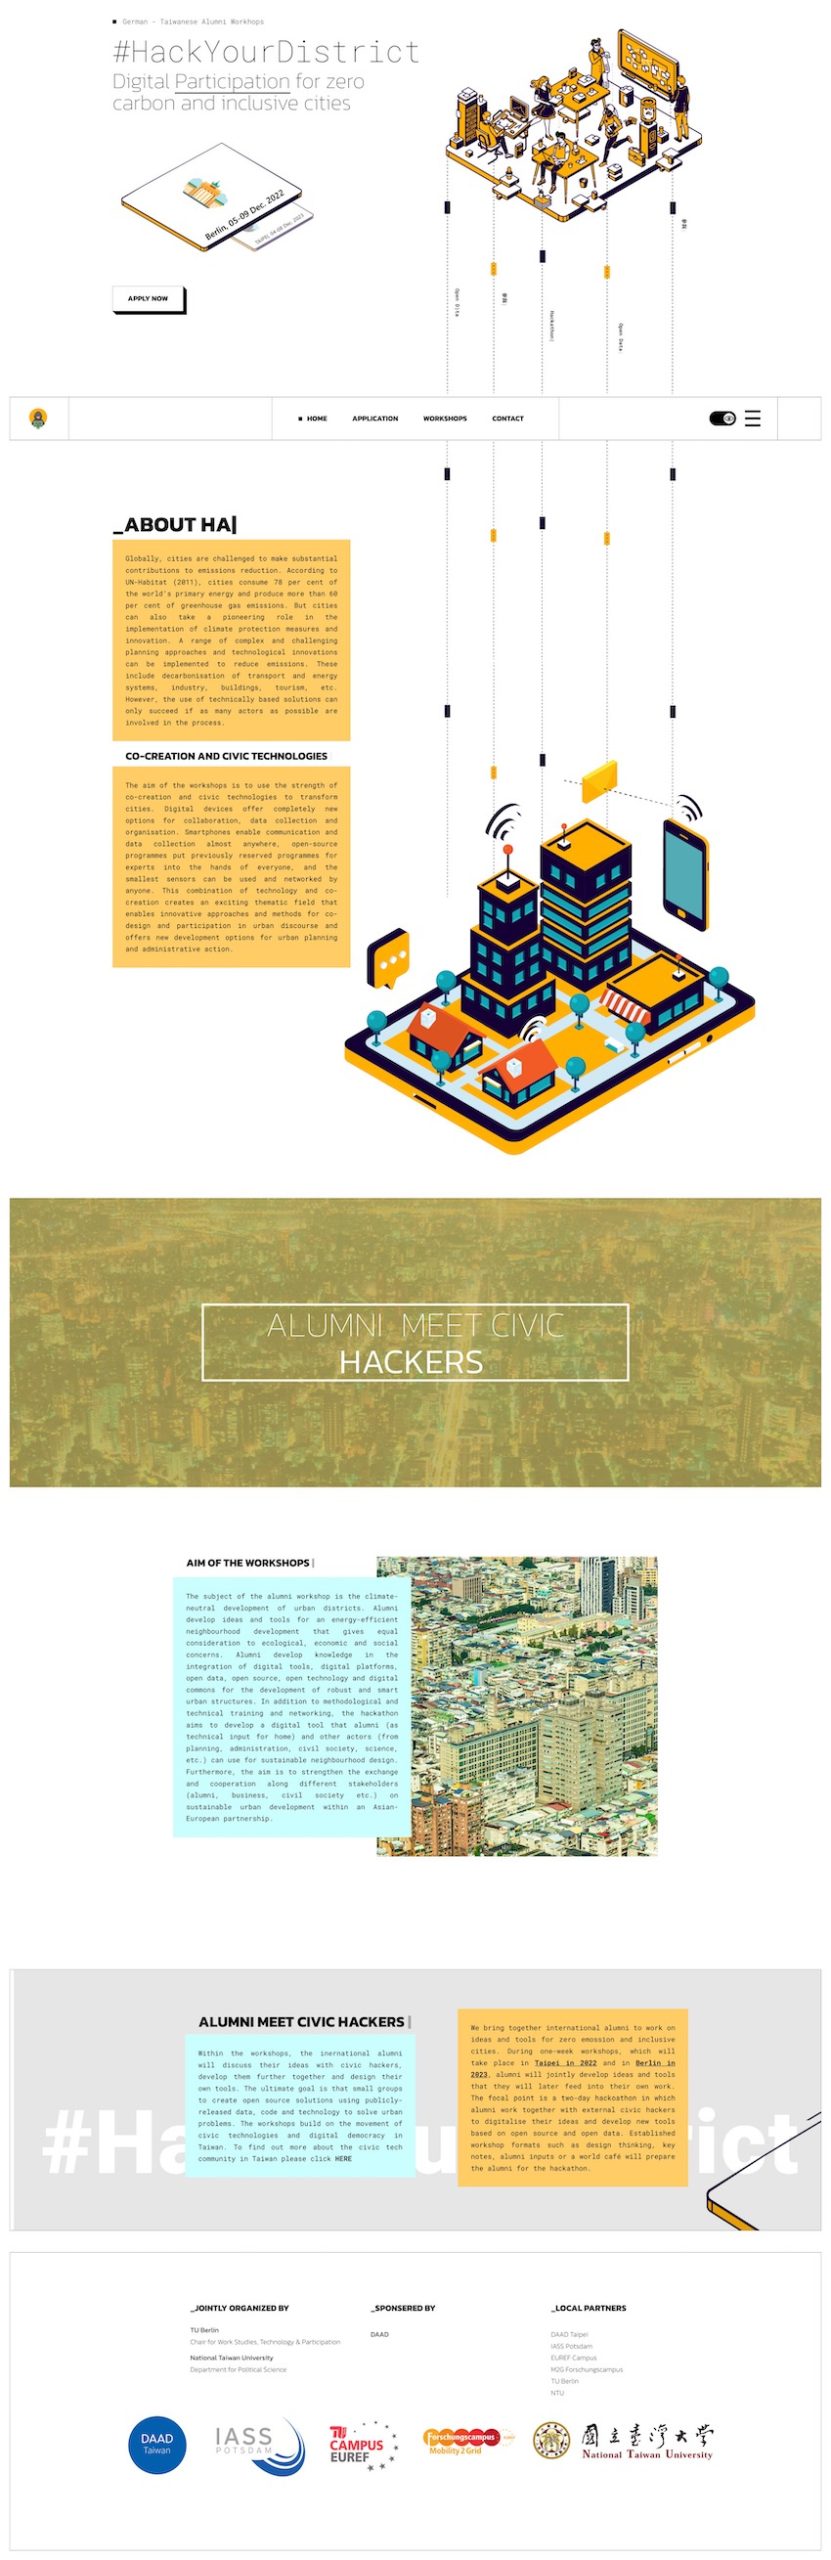 HackYourDistrict scaled